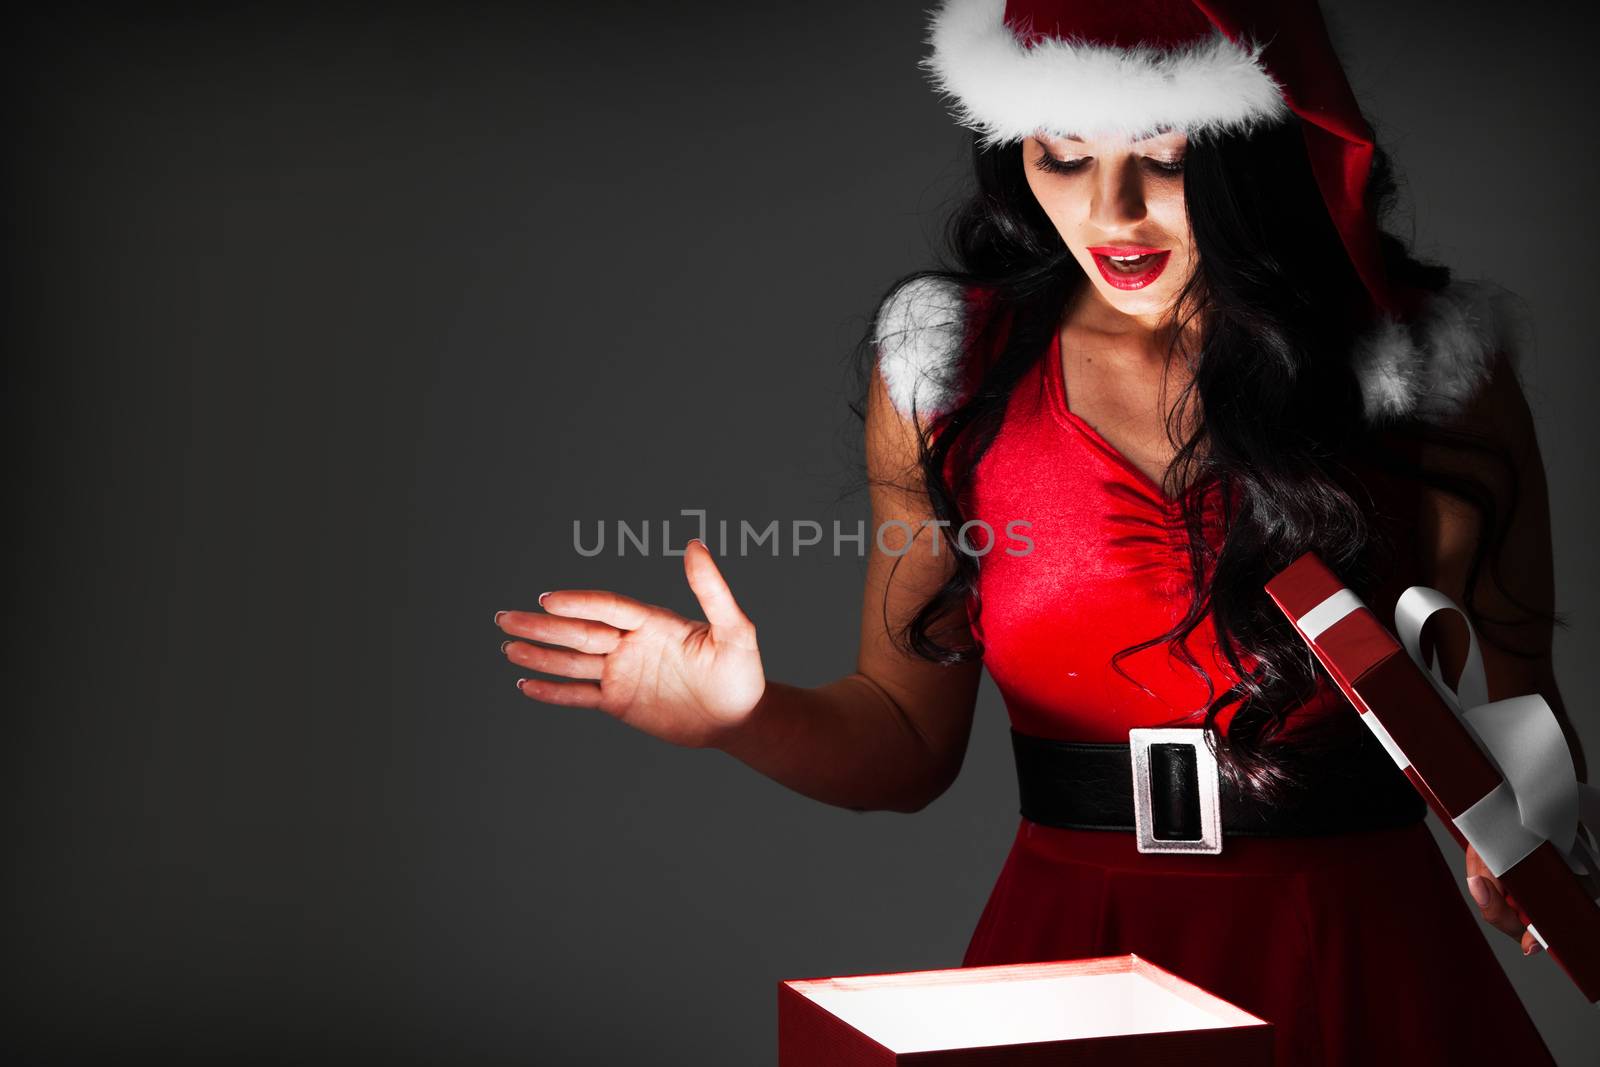 Beautiful woman in Santa Claus style costume looking into glowing Christmas gift box